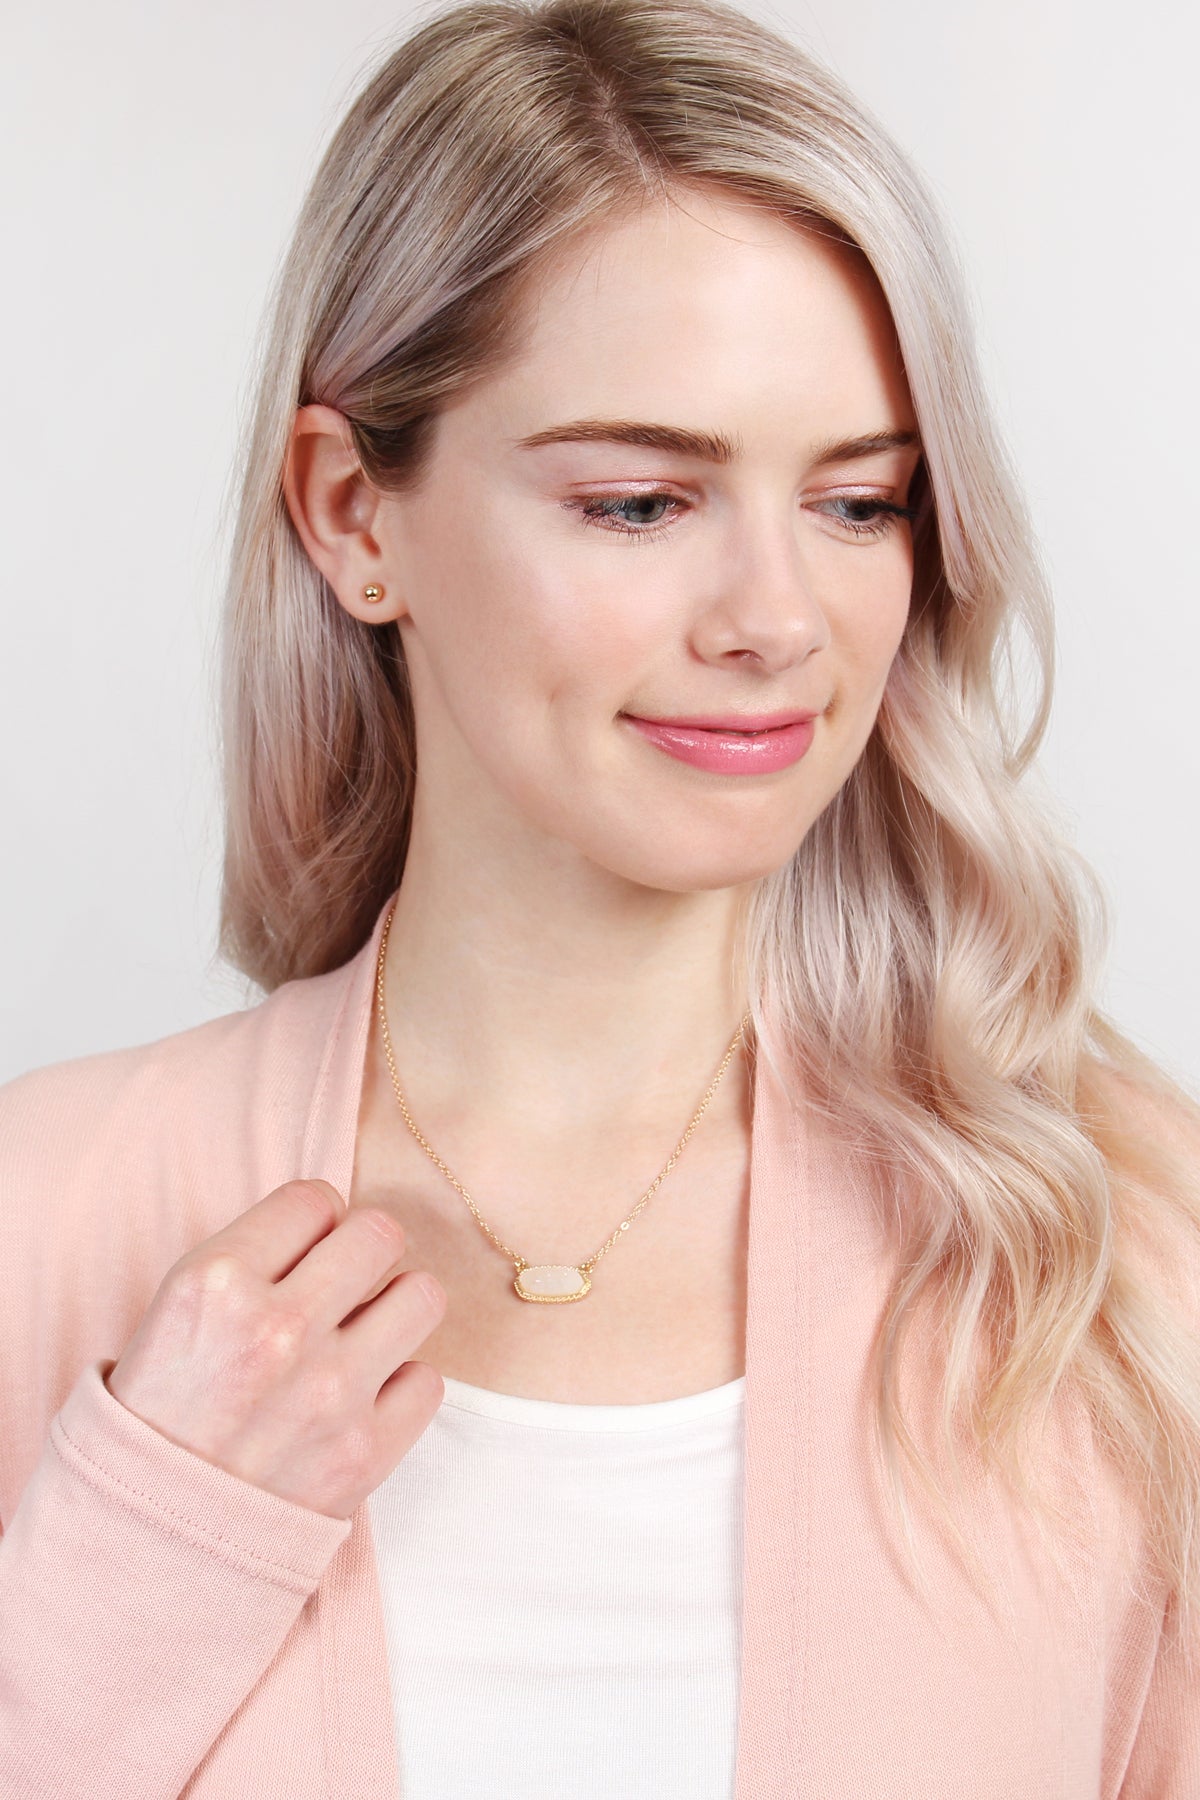 CORAL DRUZY OVAL STONE PENDANT NECKLACE AND EARRING SET